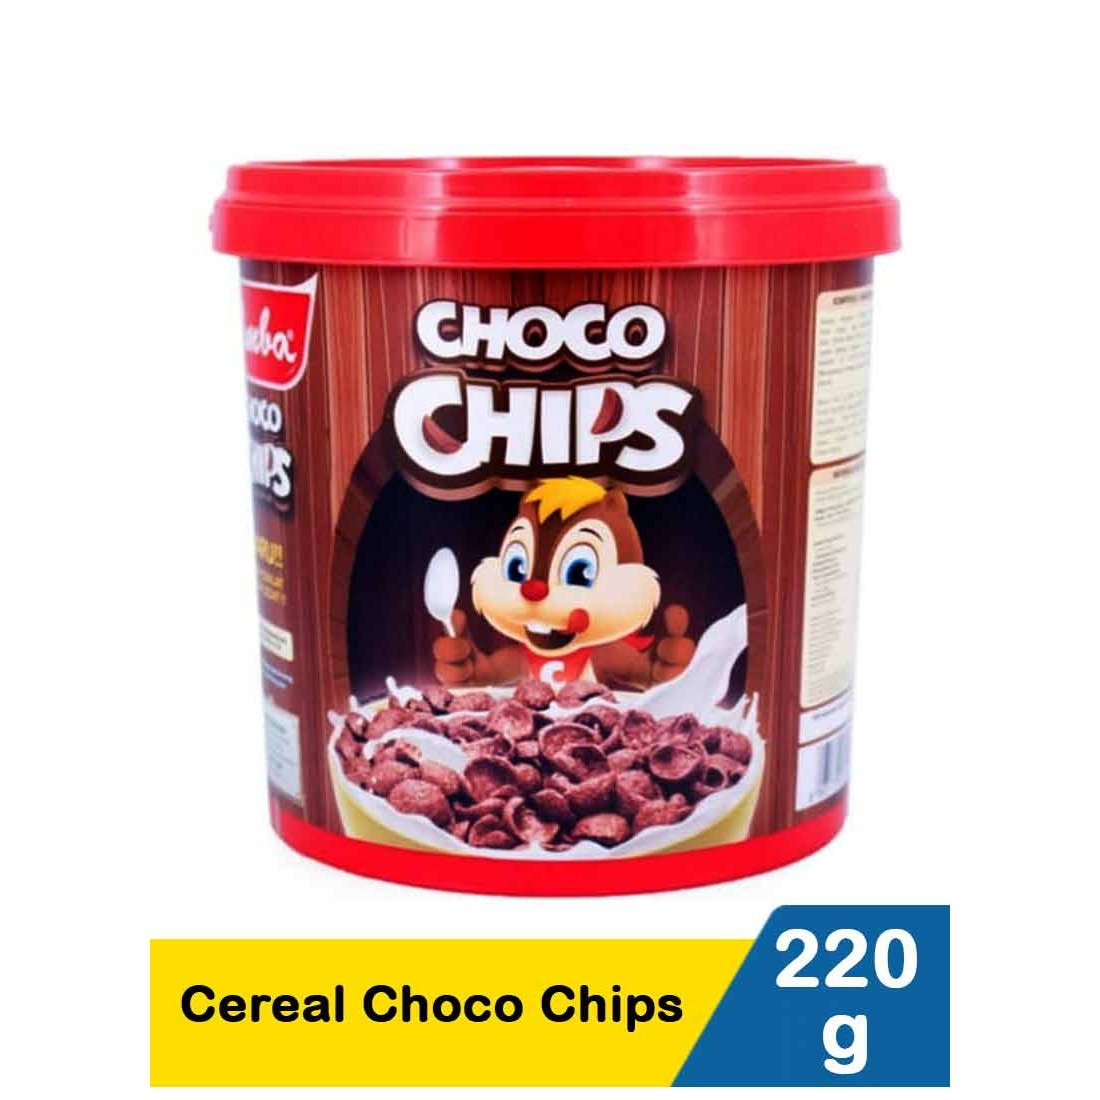 Simba 220G Cereal Choco Chips